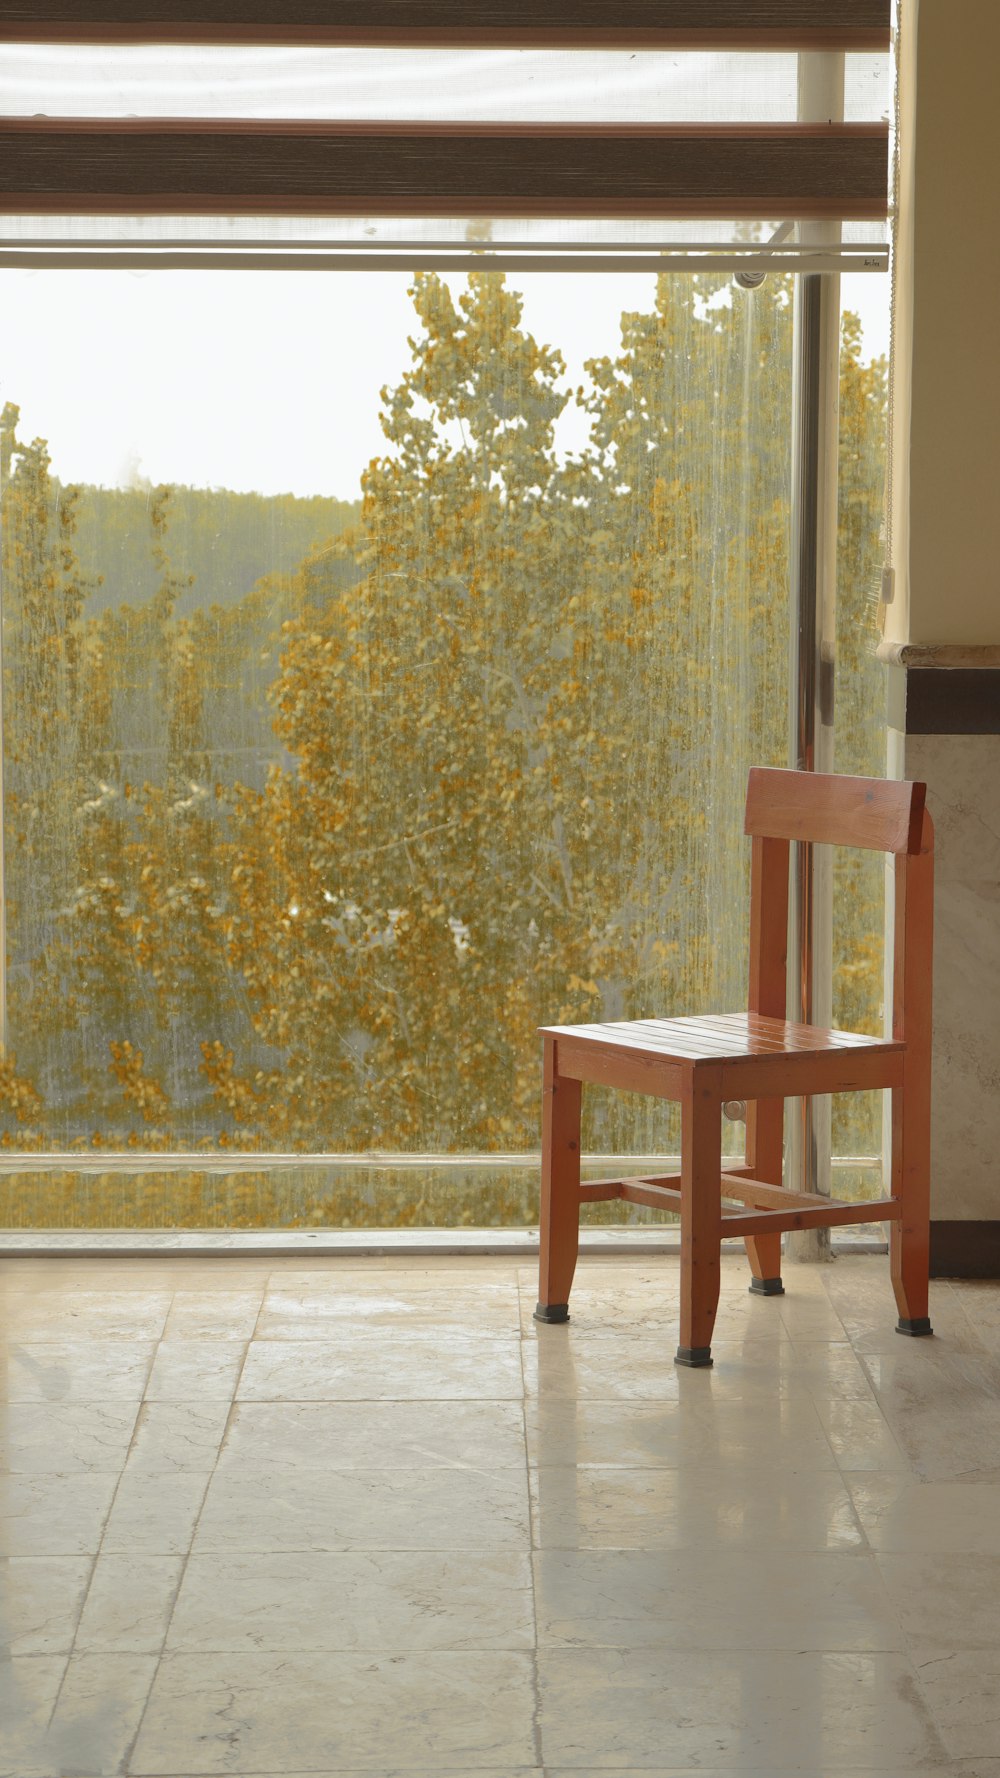 a wooden chair sitting in front of a window